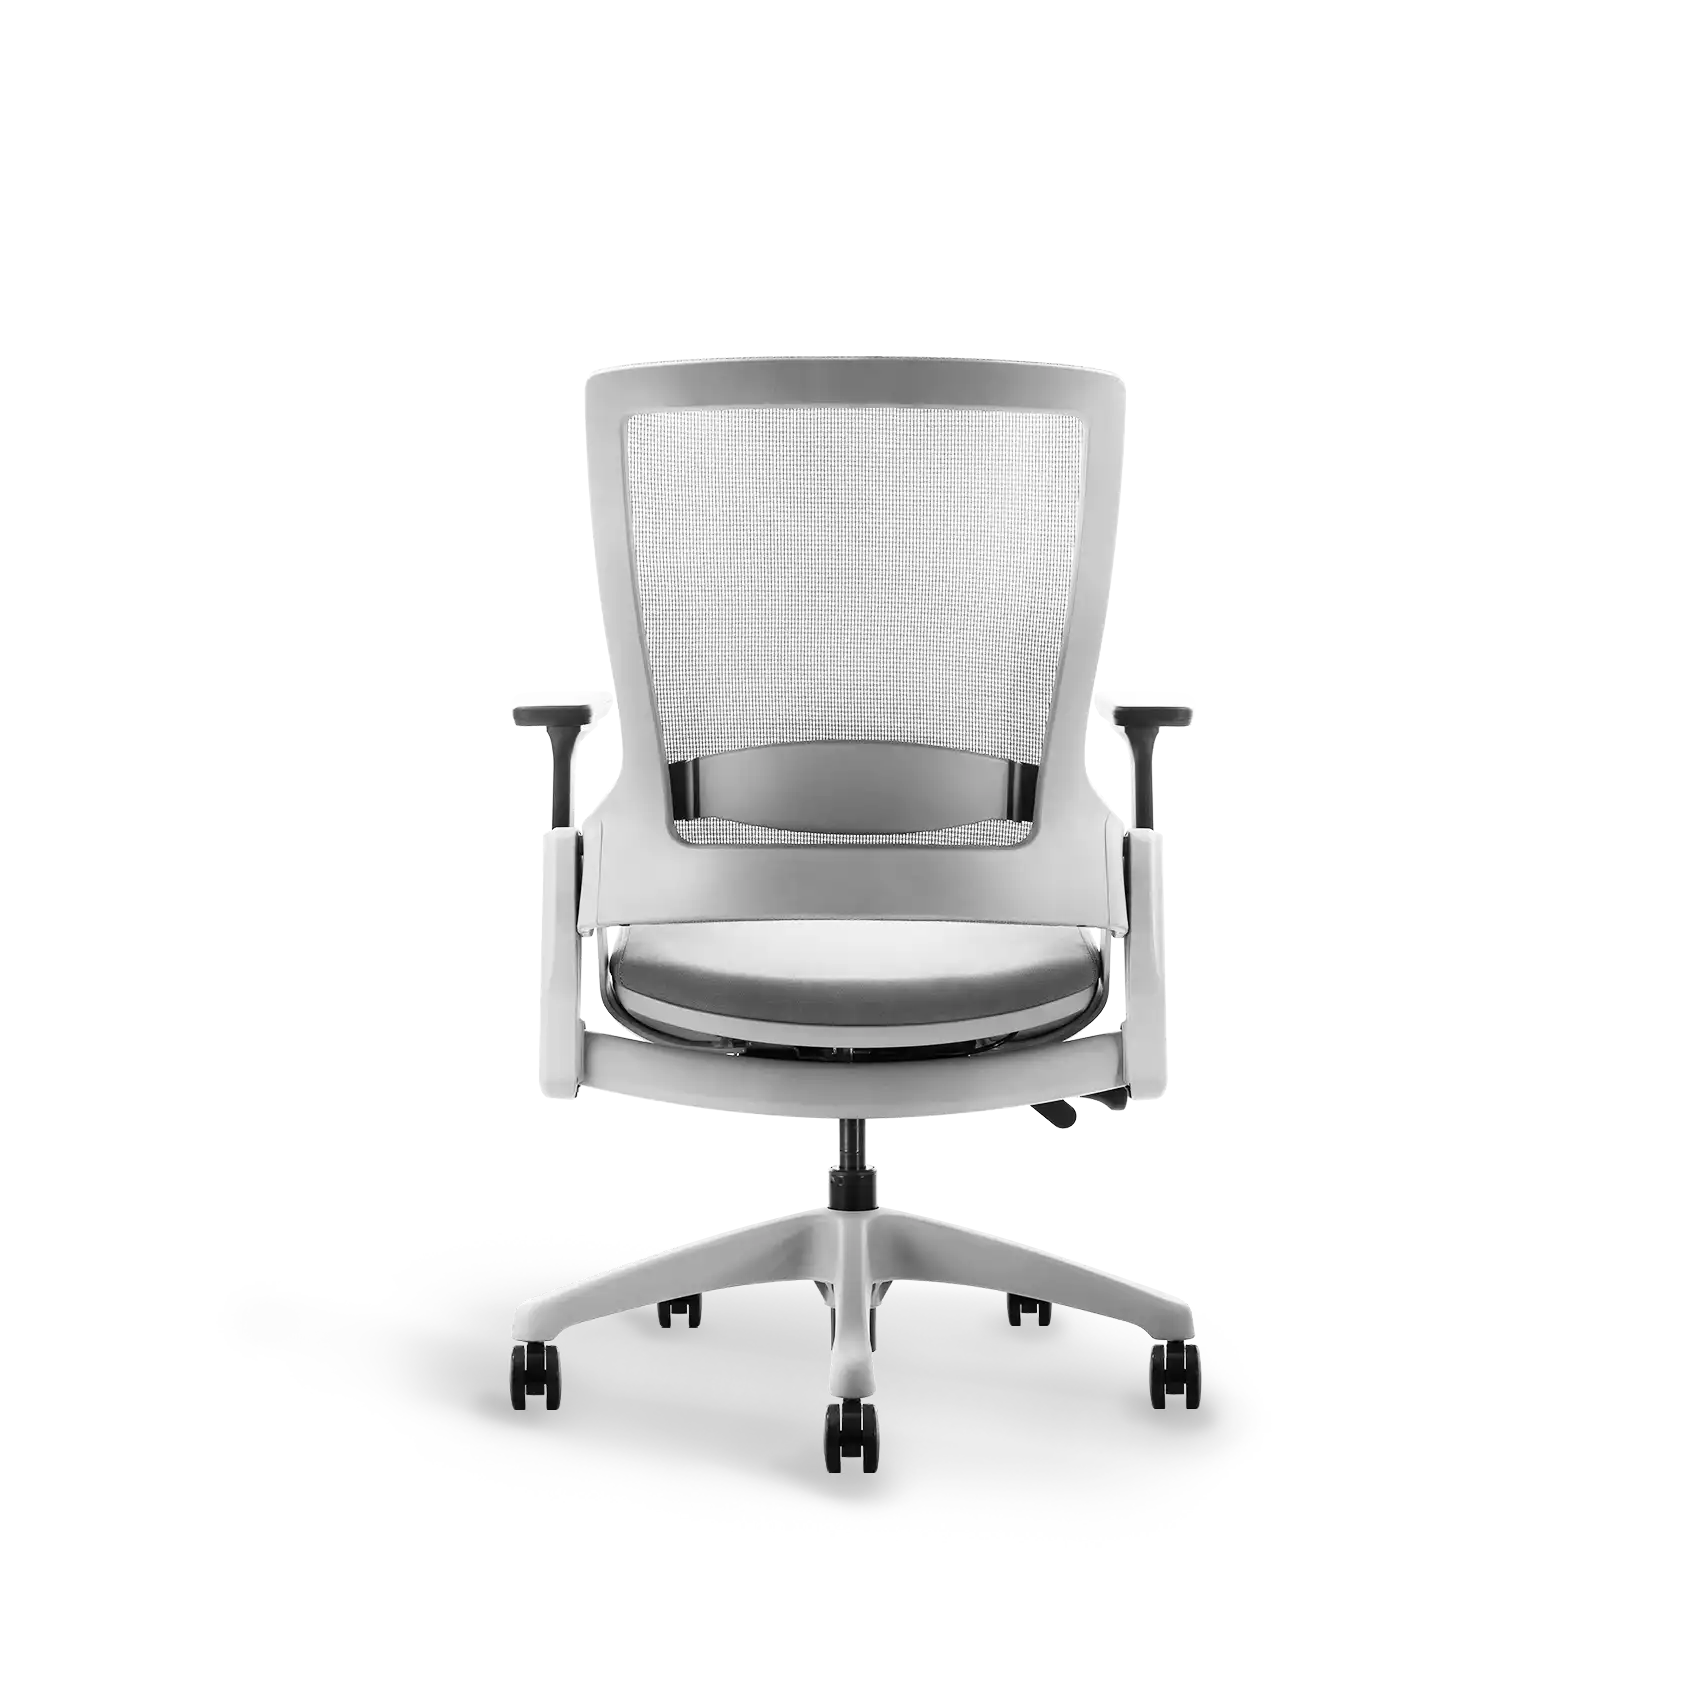 Flujo Angulo ergonomic office chair in grey without headrest, back view